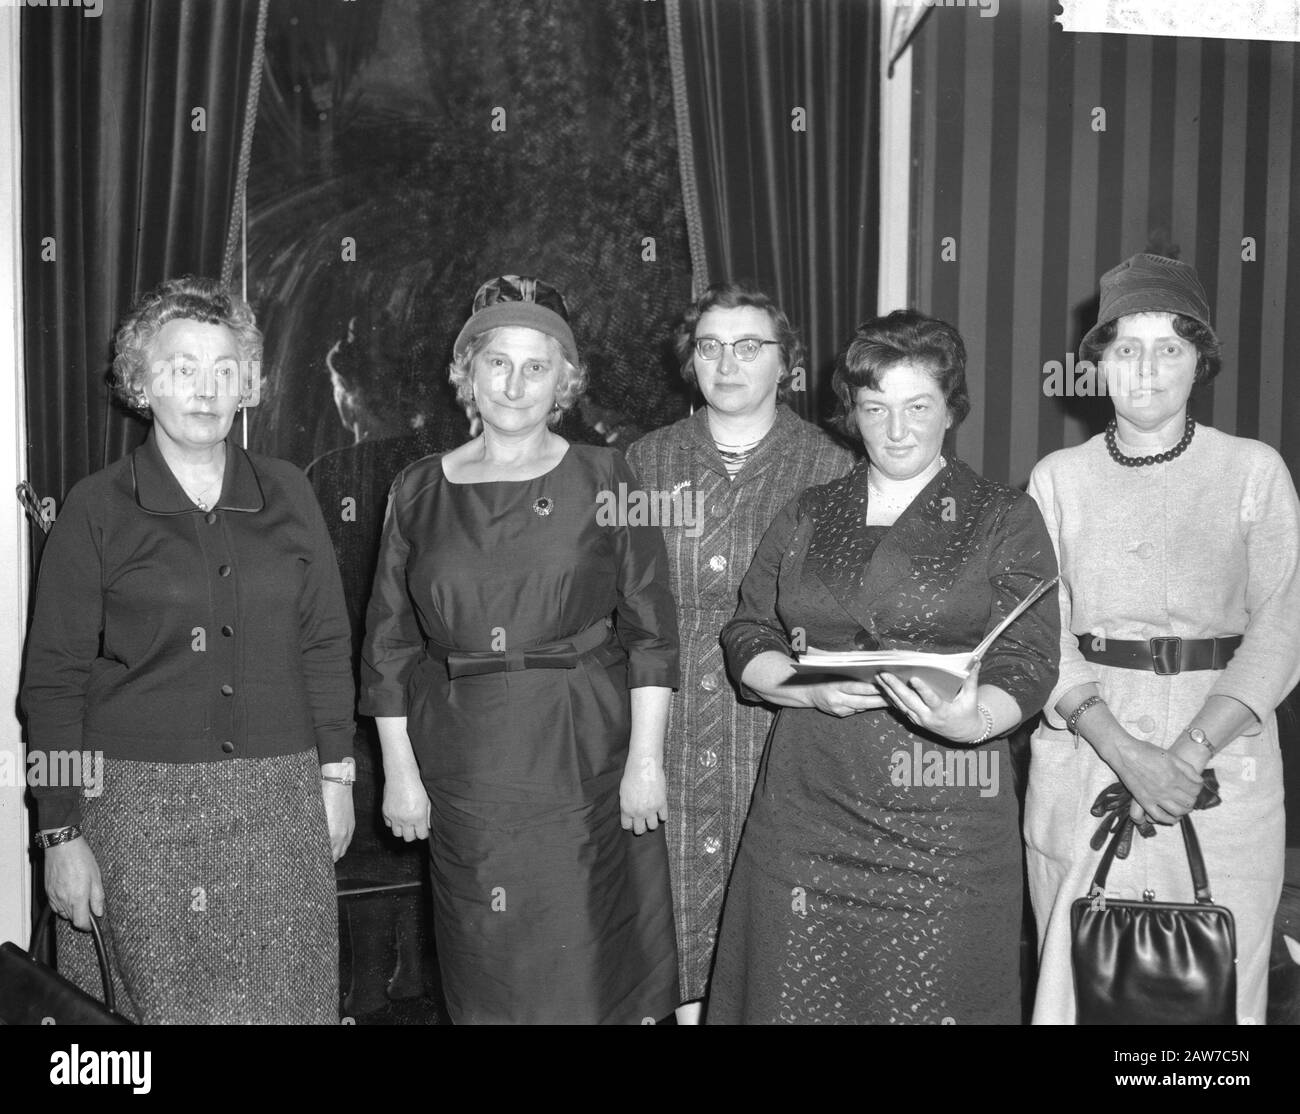 Queen Juliana receives delegation of five women in relation to New Guinea Date: March 12, 1962 Location: The Hague, South Holland Keywords: delegations, queens, revenue person Name: Juliana (queen Netherlands), Juliana, queen Stock Photo